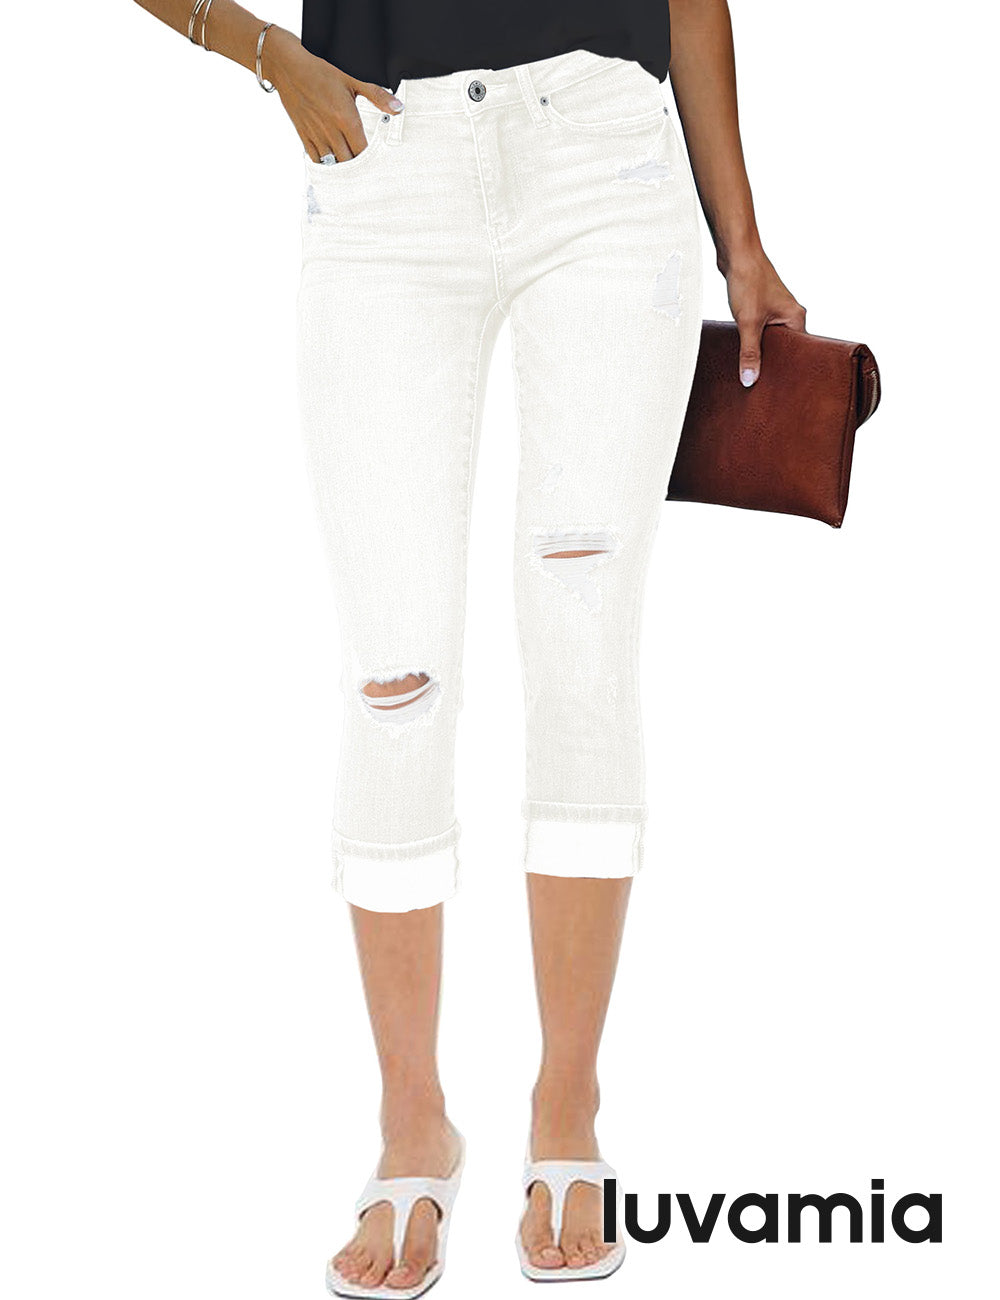 Luvamia High Waisted Distressed Capri Jeans for Women | Stretch Skinny  Cropped Pants